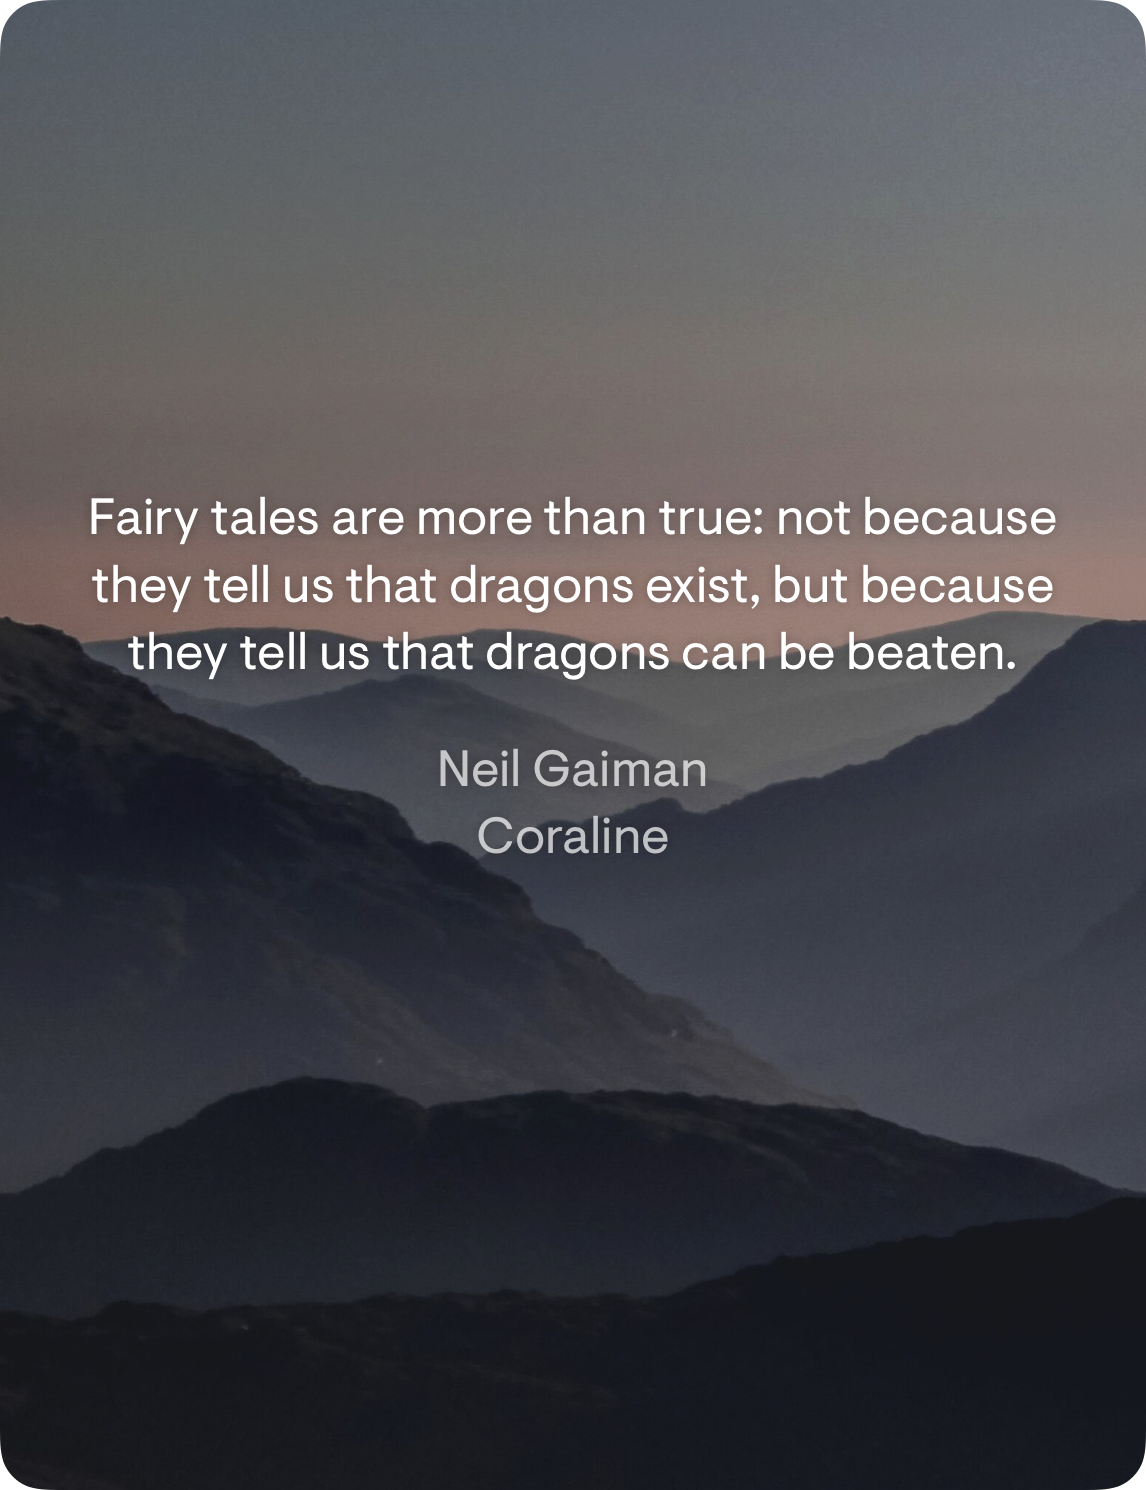 Coniferous trees shrouded in fog with an overlaying inspirational quote: "Fairy tales are more than true: not because they tell us that dragons exist, but because they tell us that dragons can be beaten. - Neil Gaiman, Coraline."